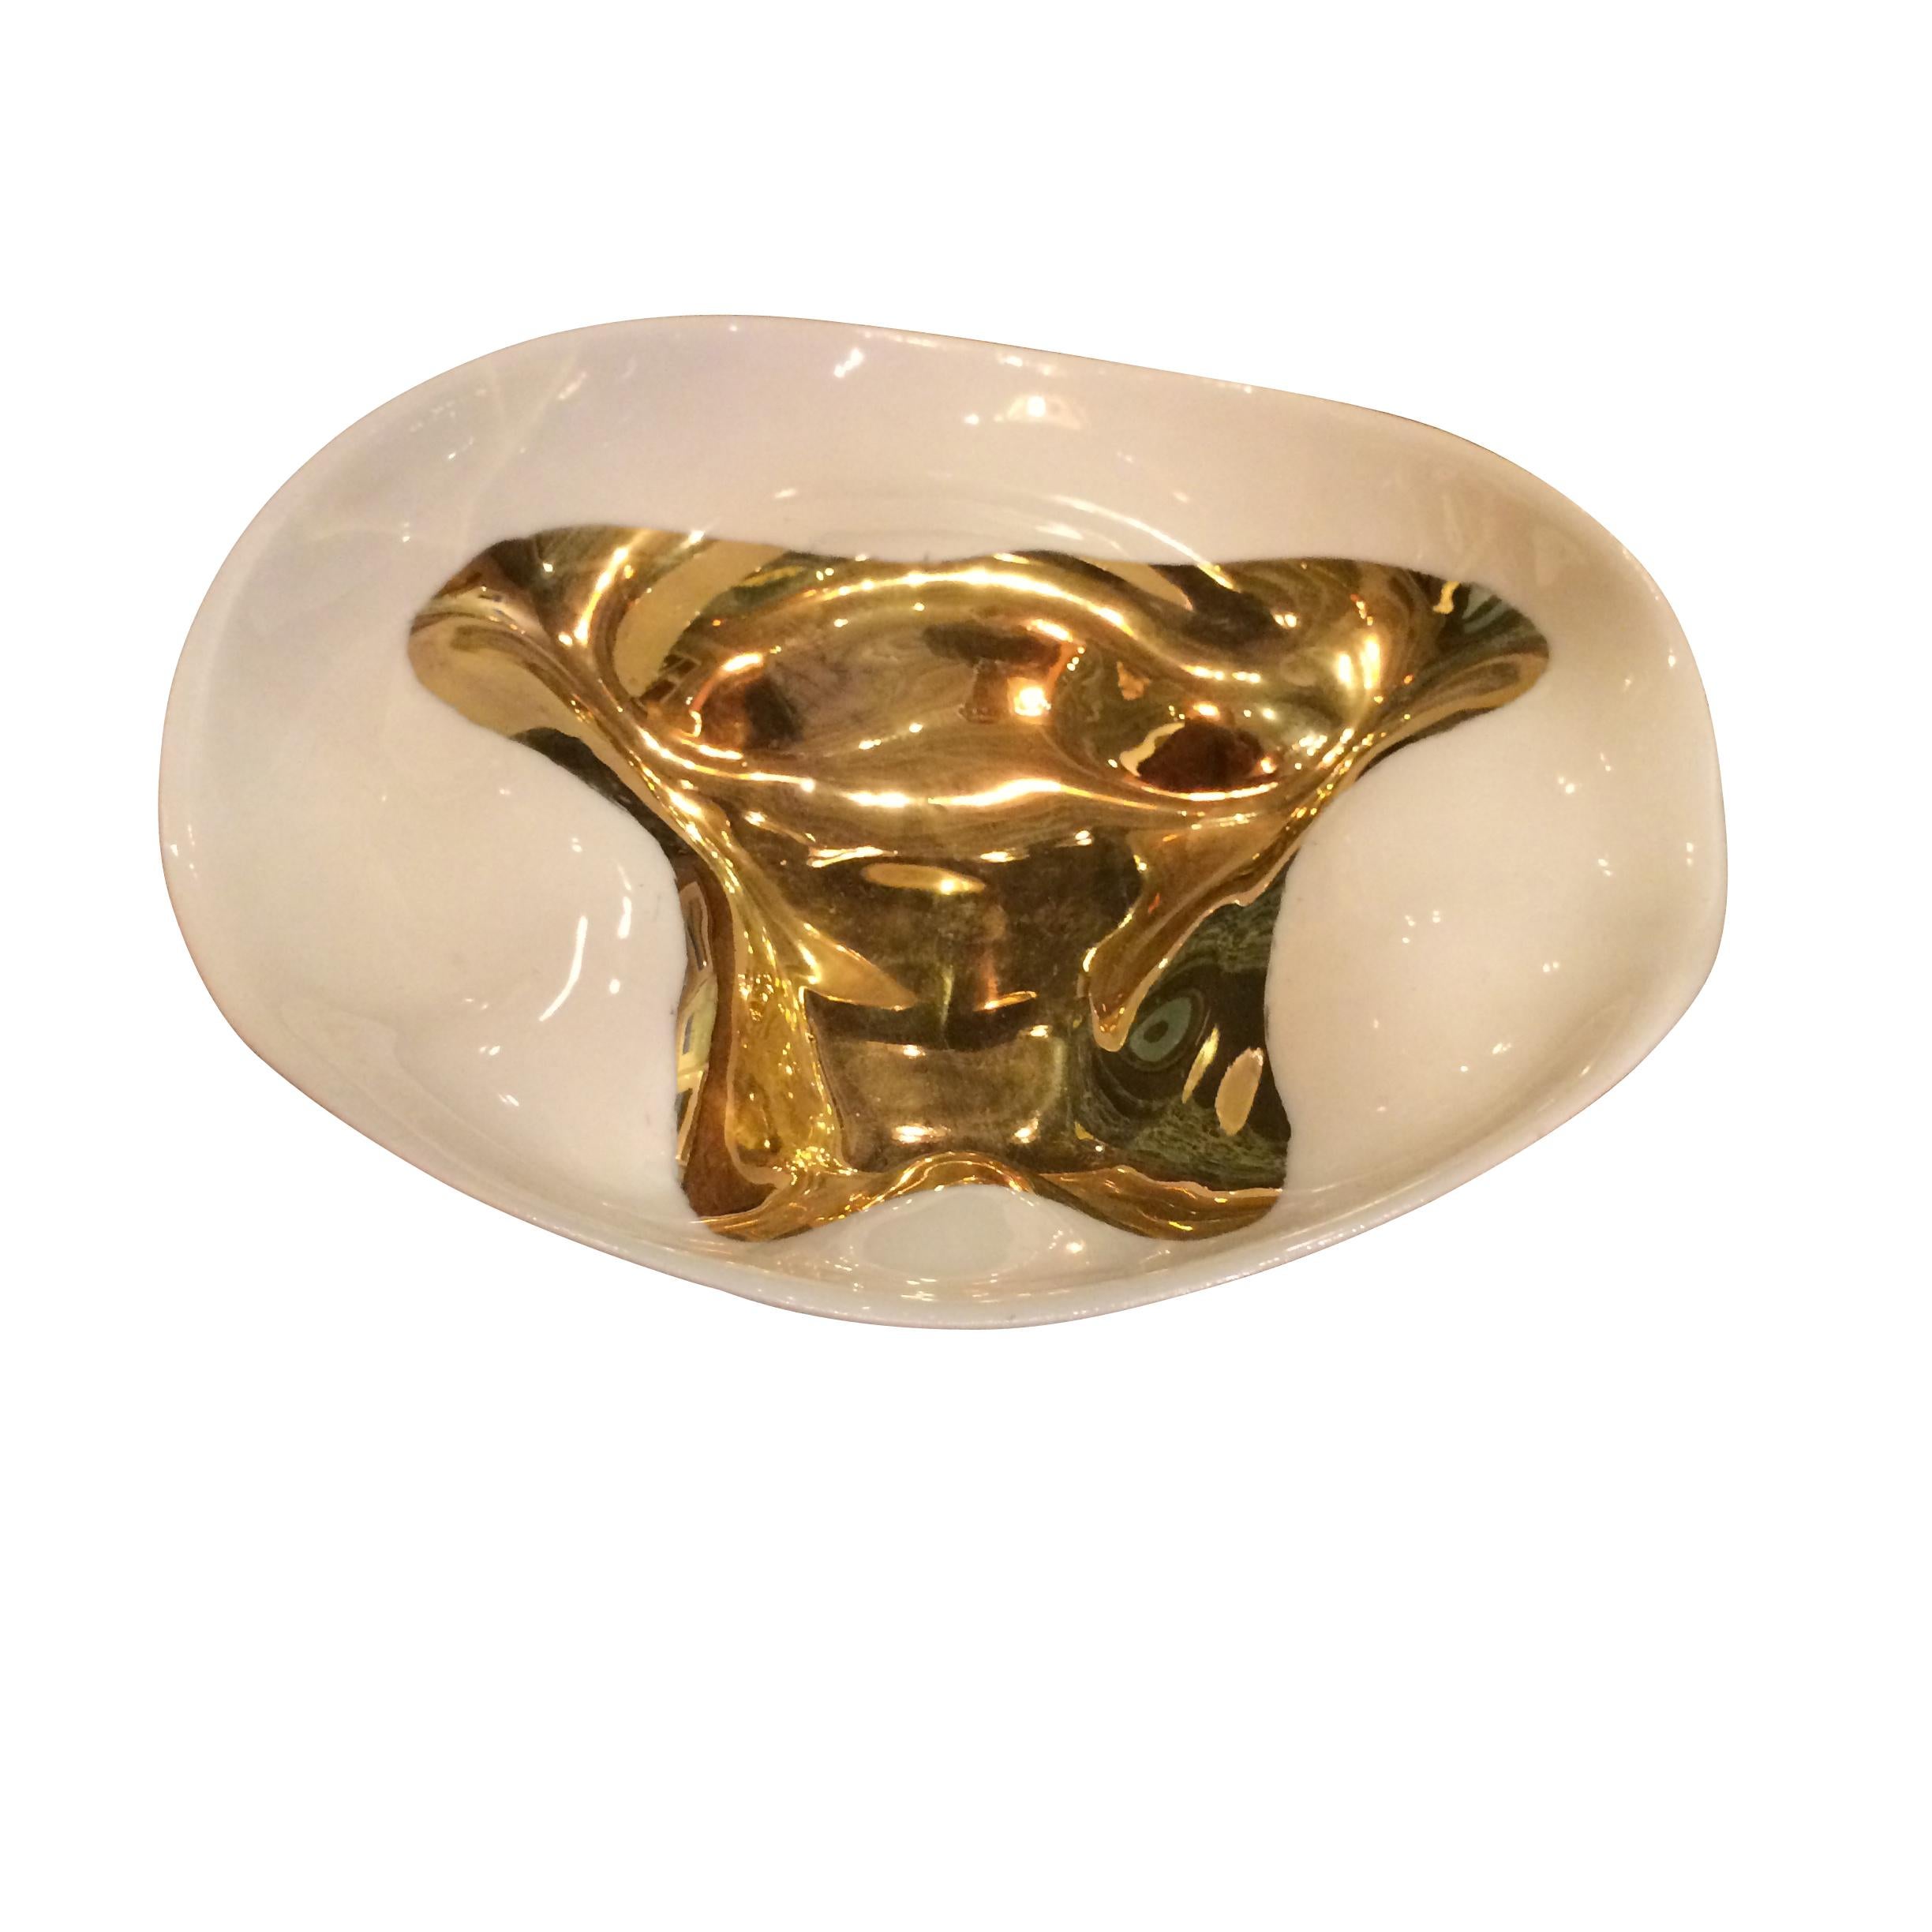 Handmade gold leaf accented bowl.
Free-form organic shape.
Fine ceramic base.
Similar bowls are available in 10